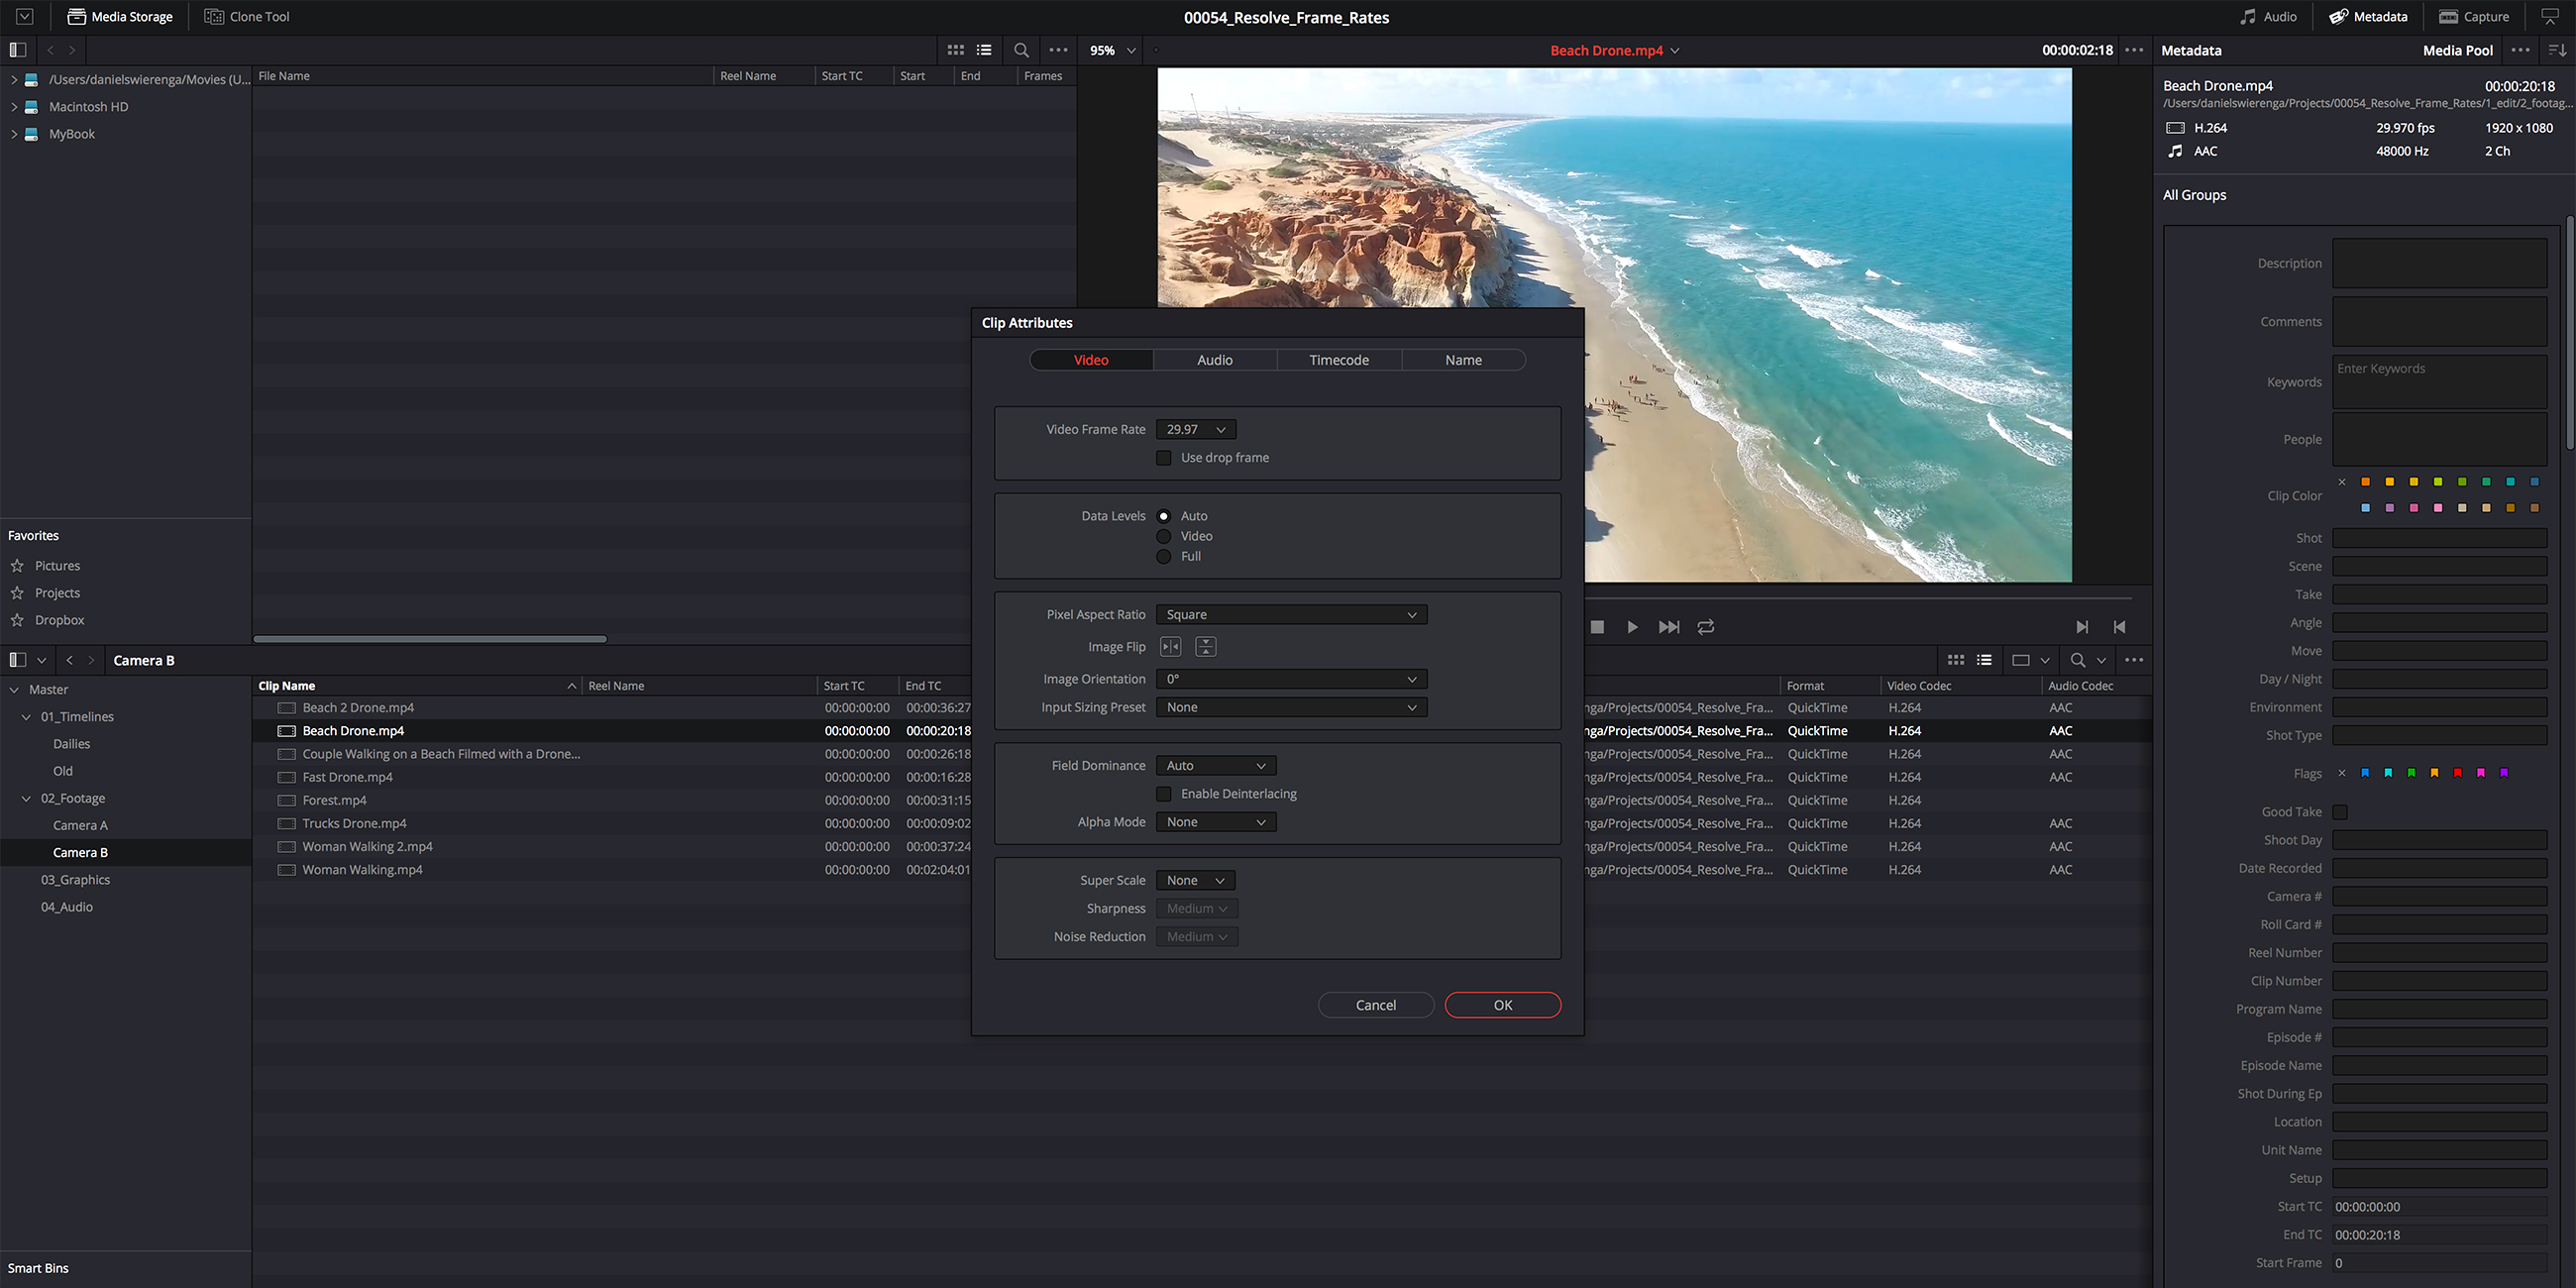 Mixing Frame Rates in DaVinci Resolve – Part 2: Native Frame Rates